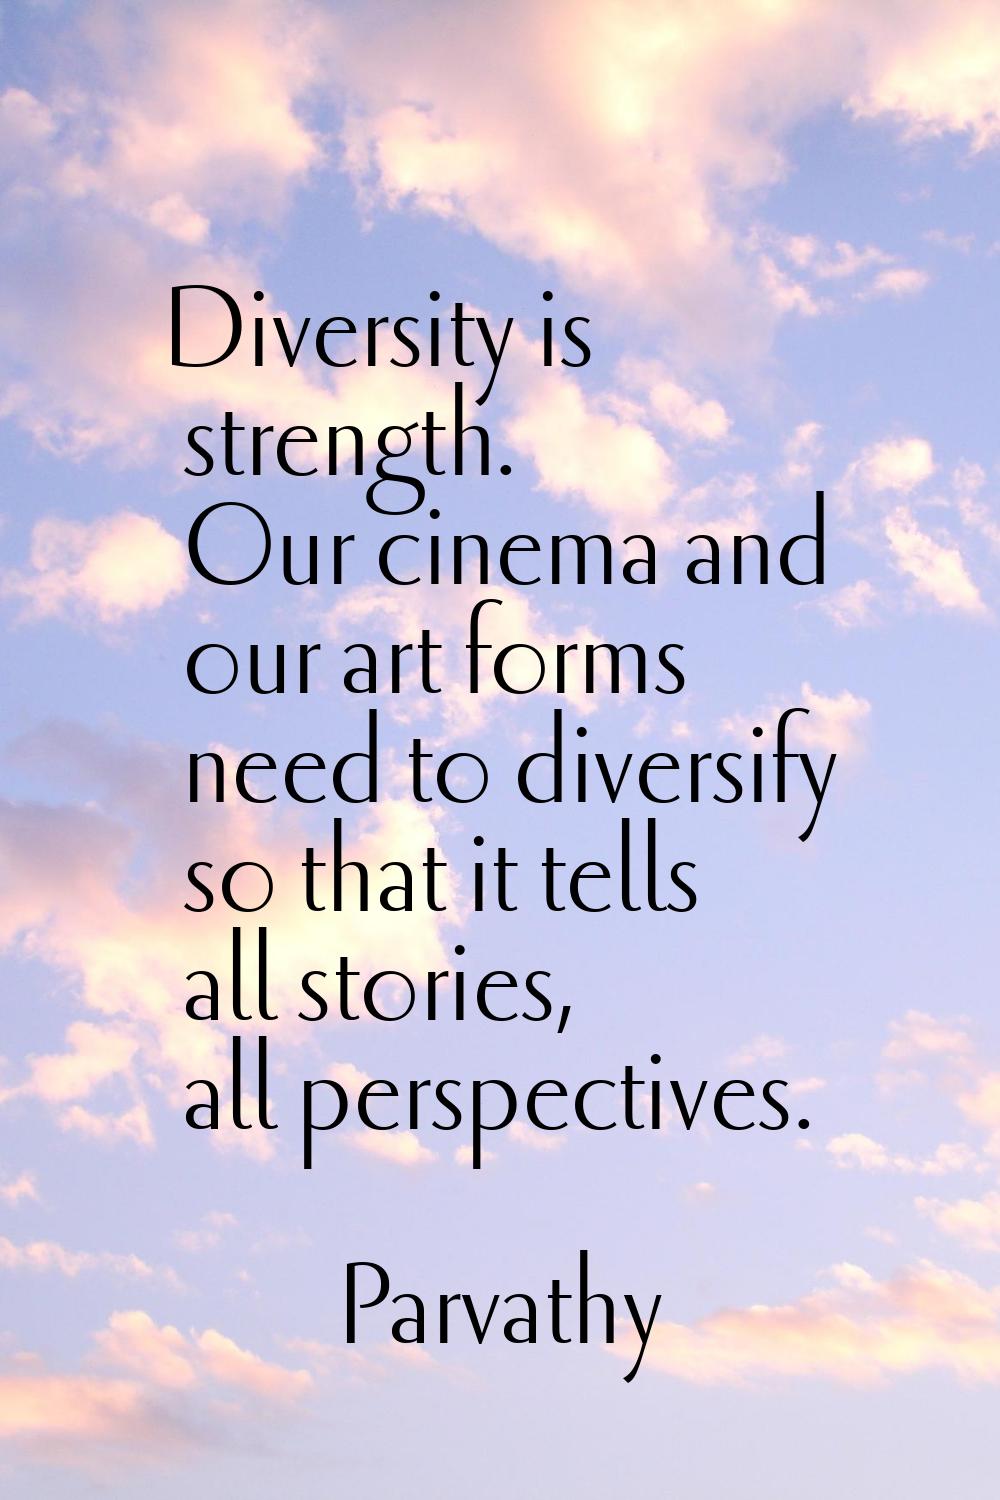 Diversity is strength. Our cinema and our art forms need to diversify so that it tells all stories,